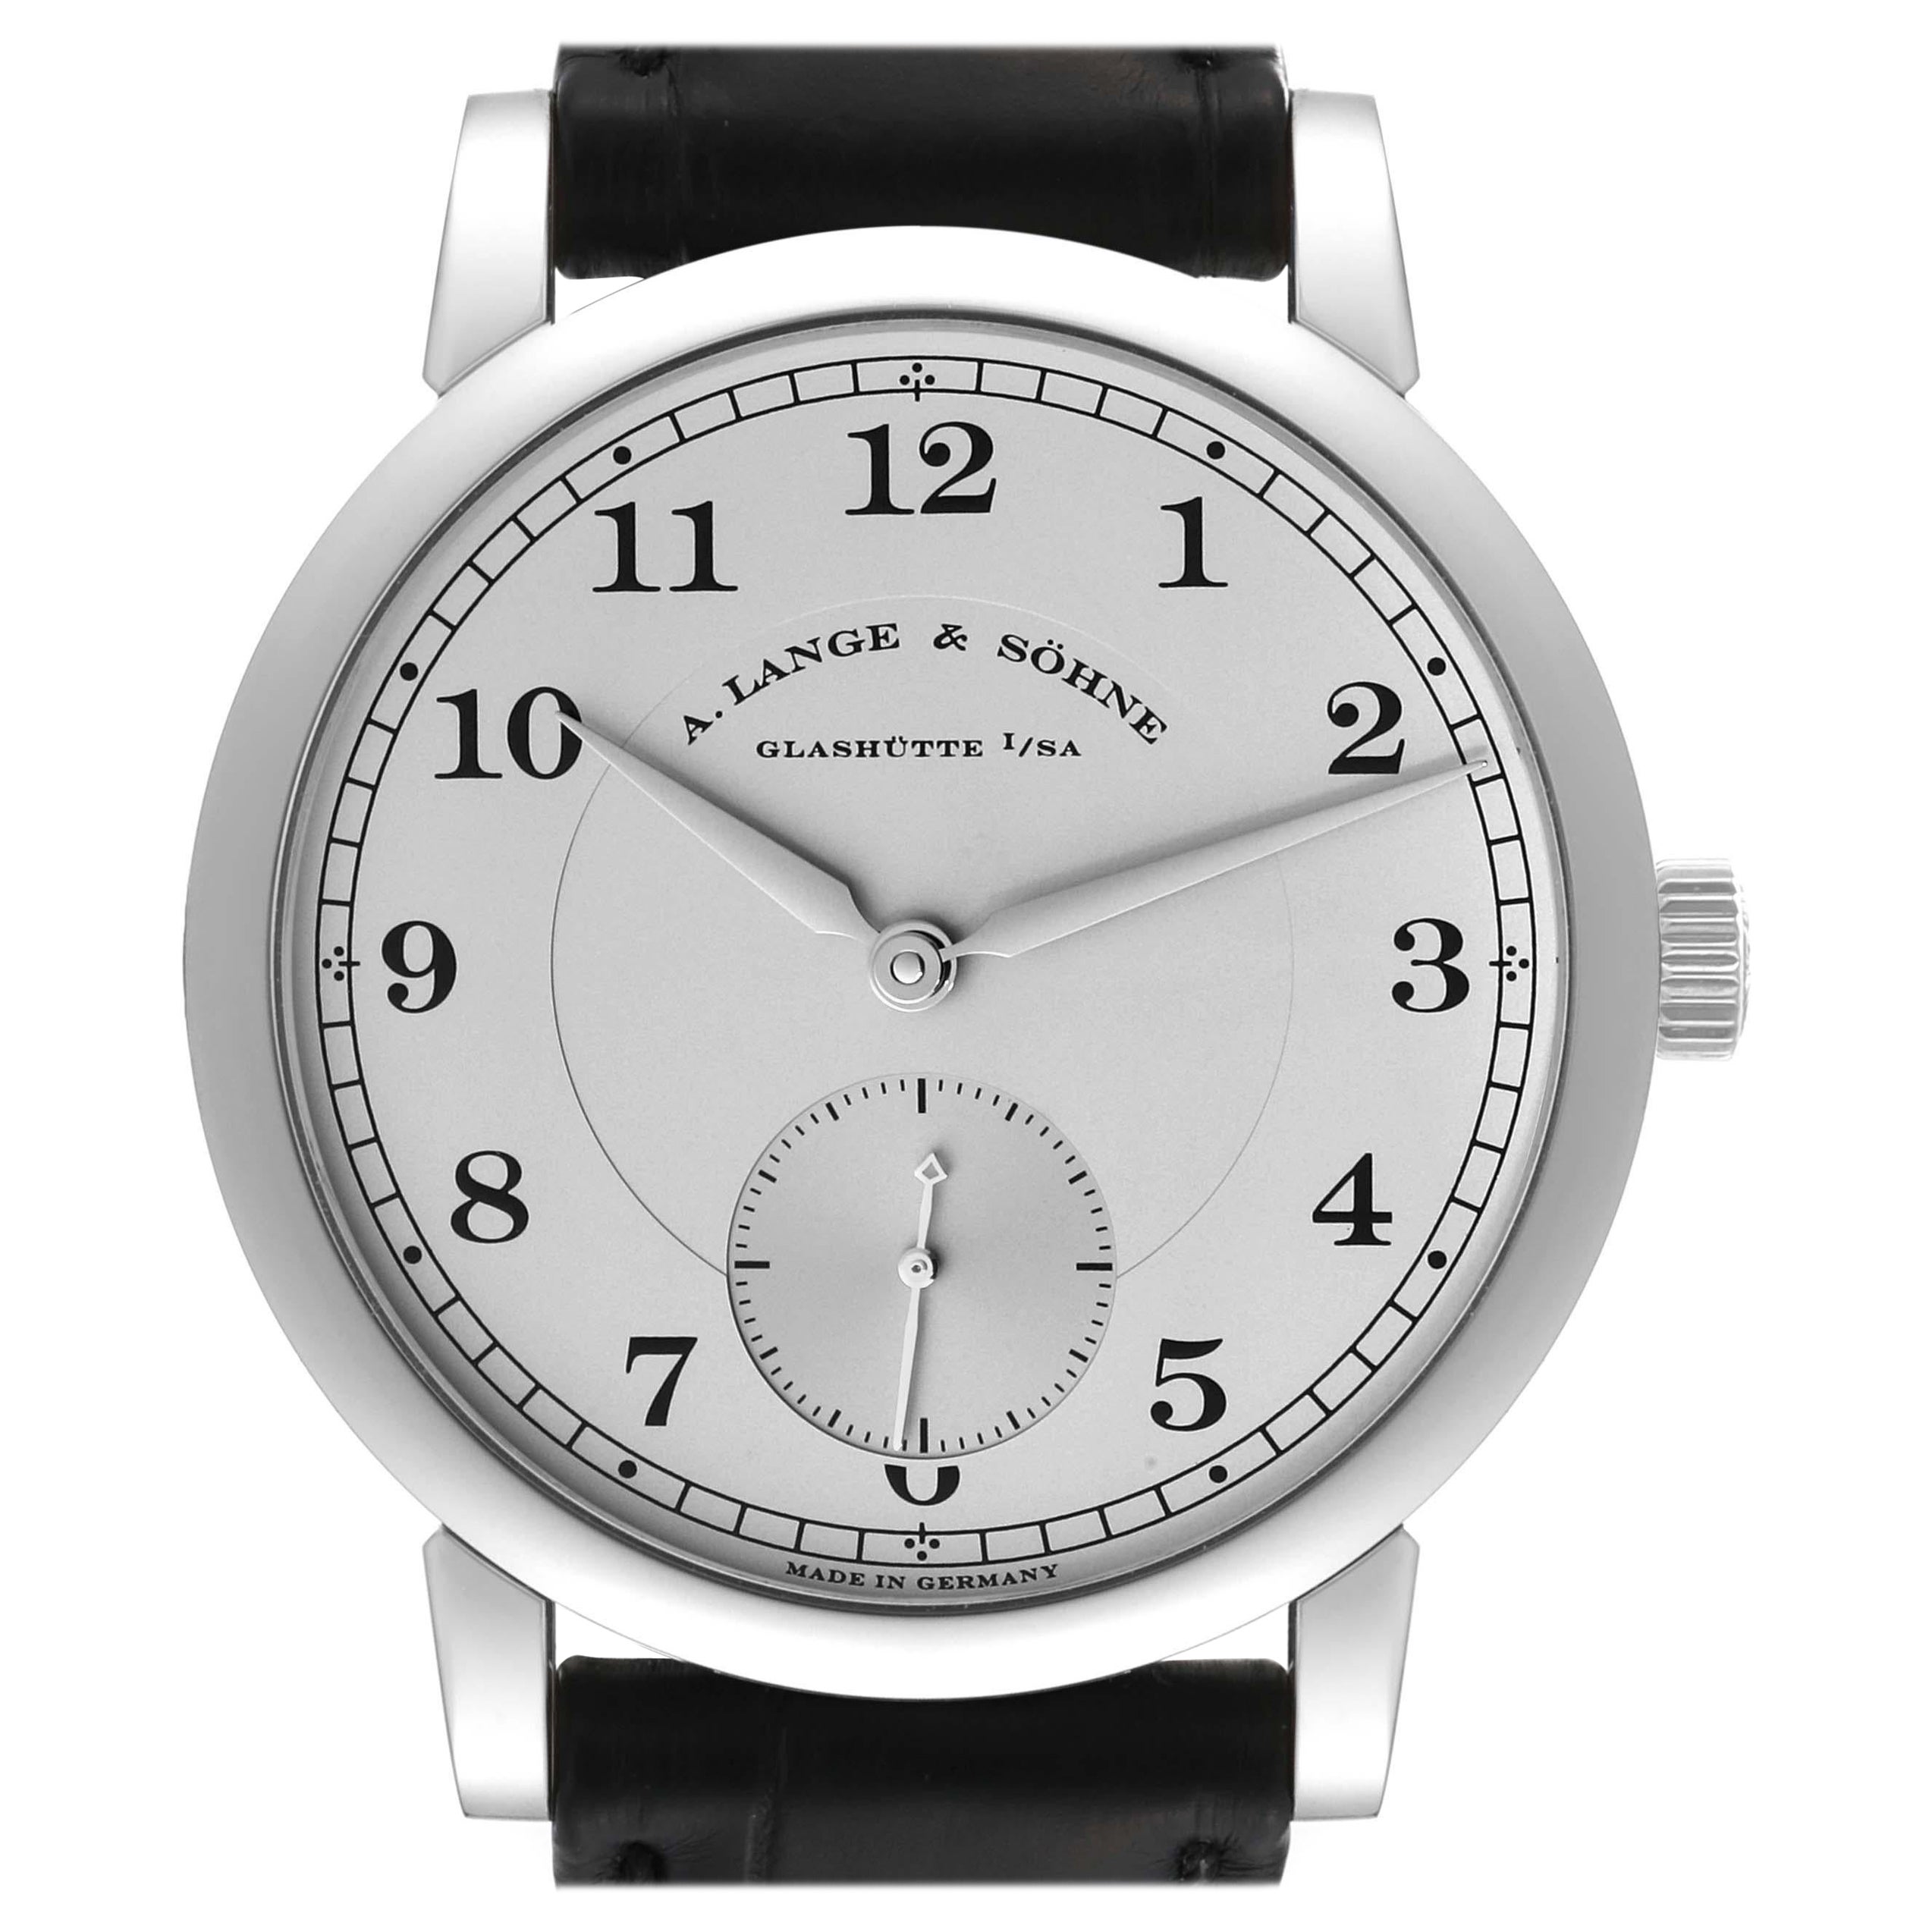 A. Lange and Sohne 1815 Platinum Mens Watch 233.025 Papers